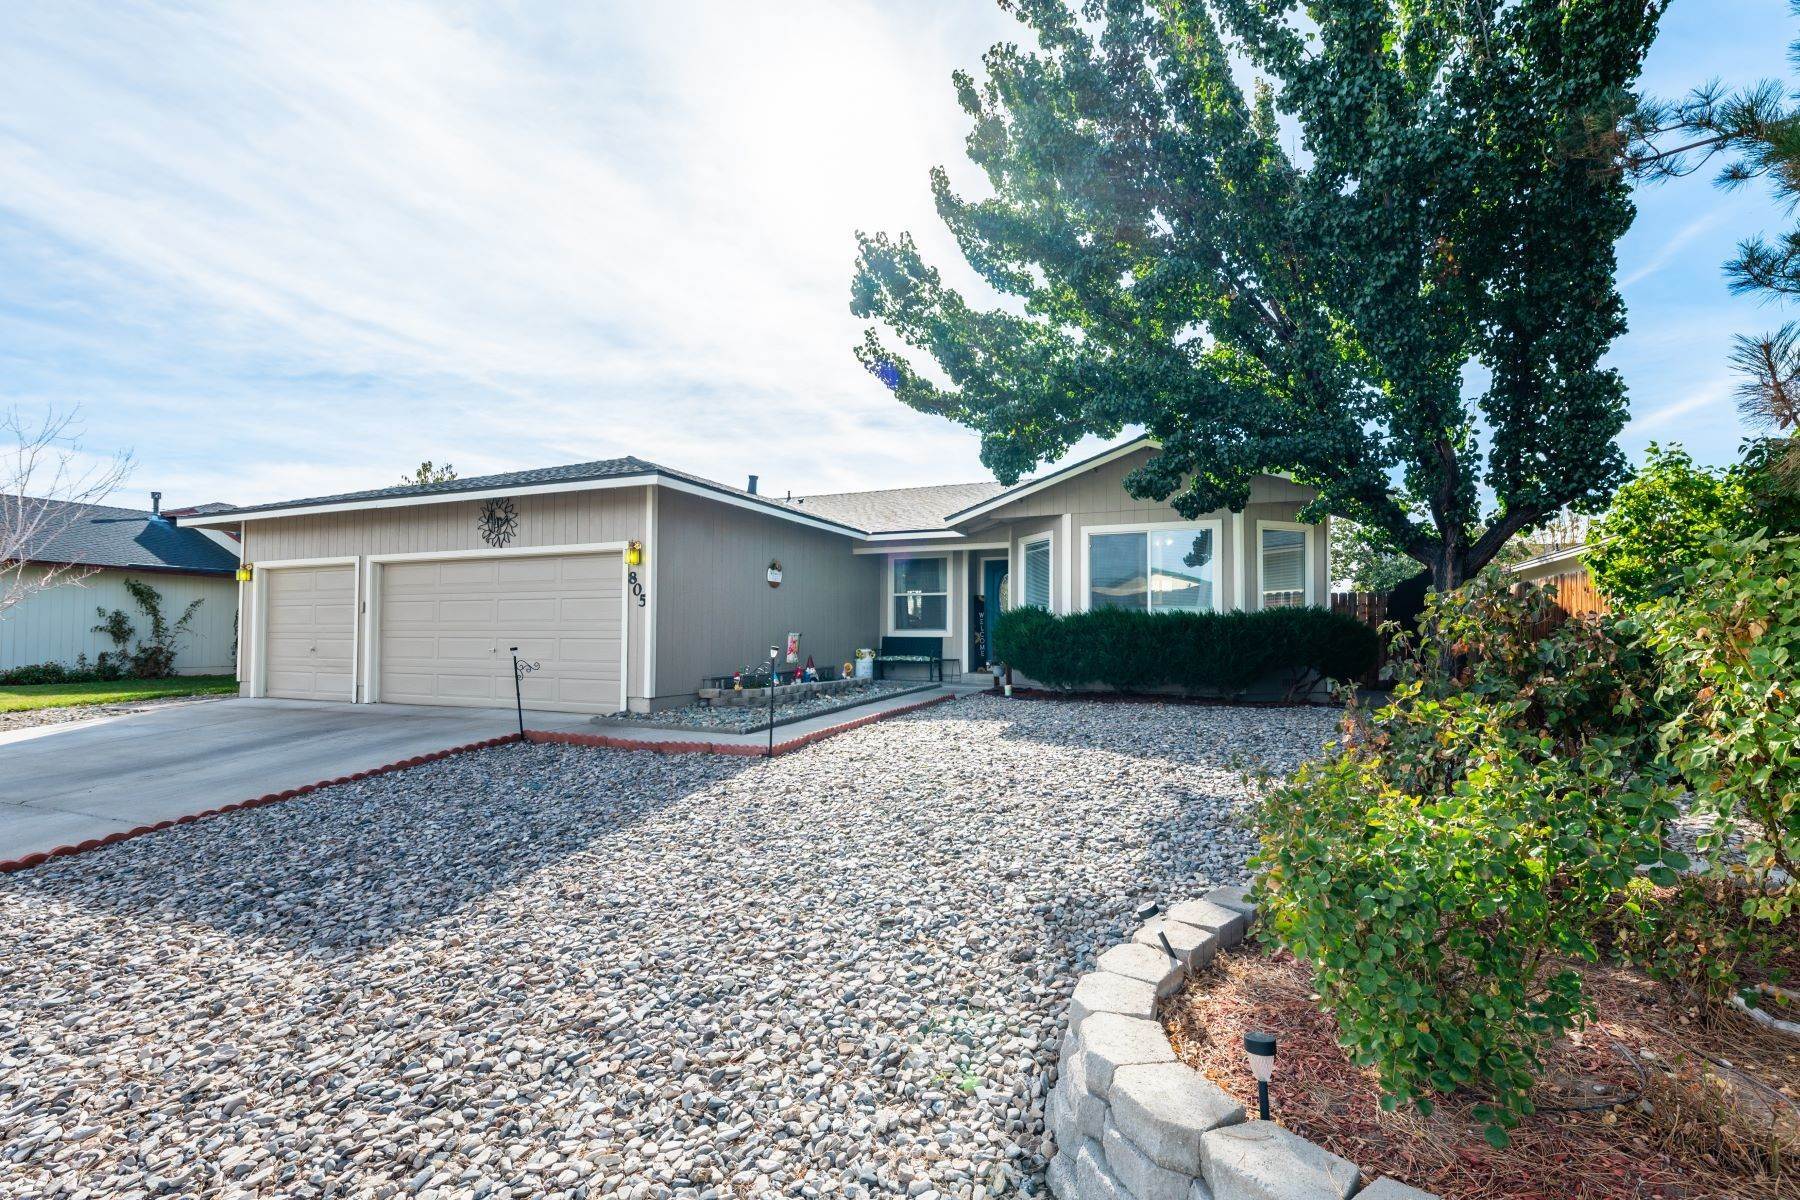 2. Single Family Homes for Active at Turnkey Fernley Home 805 Brittany Ct Fernley, Nevada 89408 United States